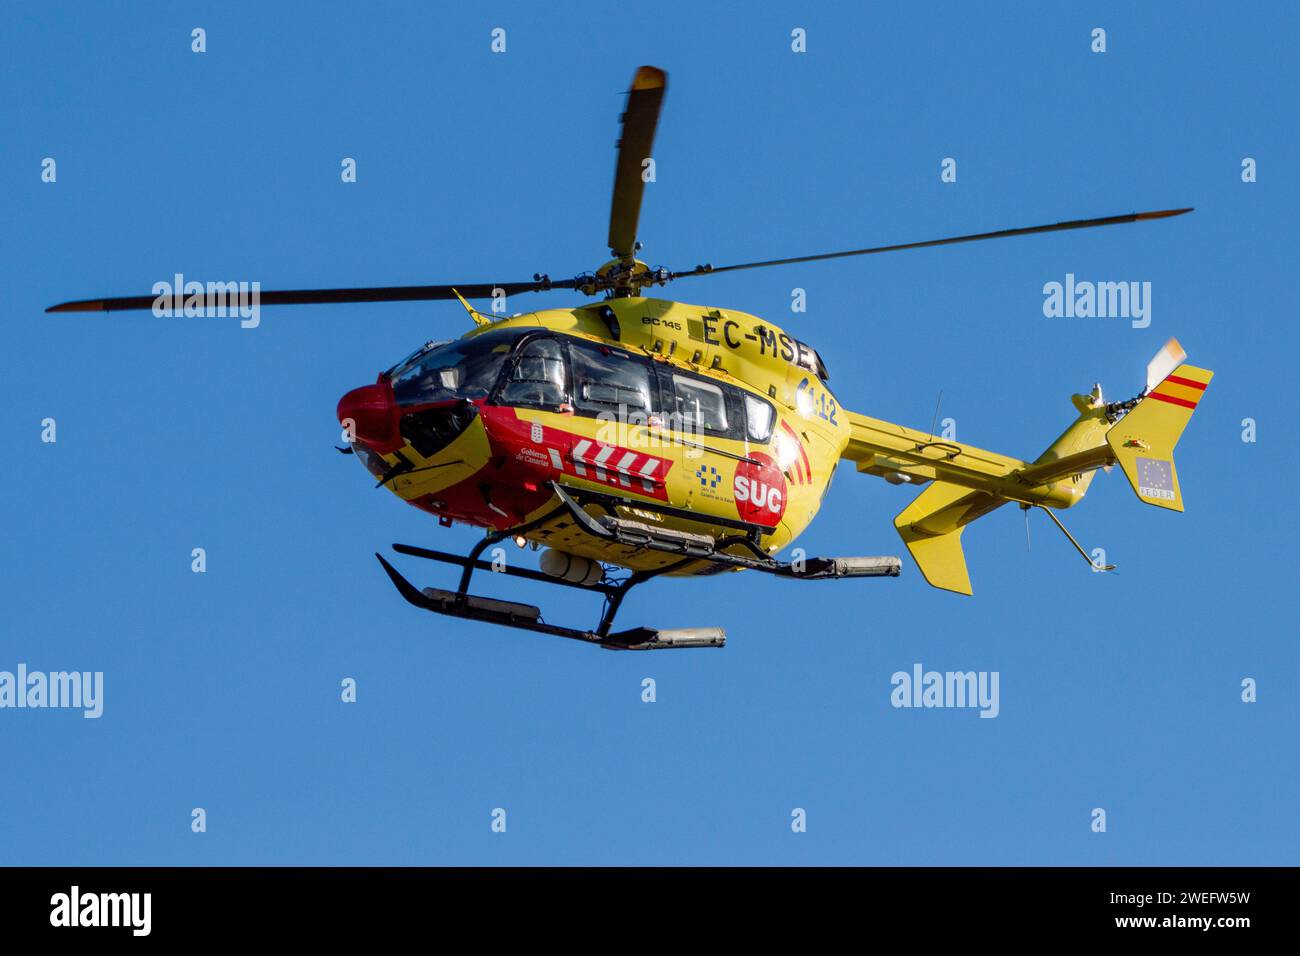 Eurocopter EC-145 medical helicopter Stock Photo